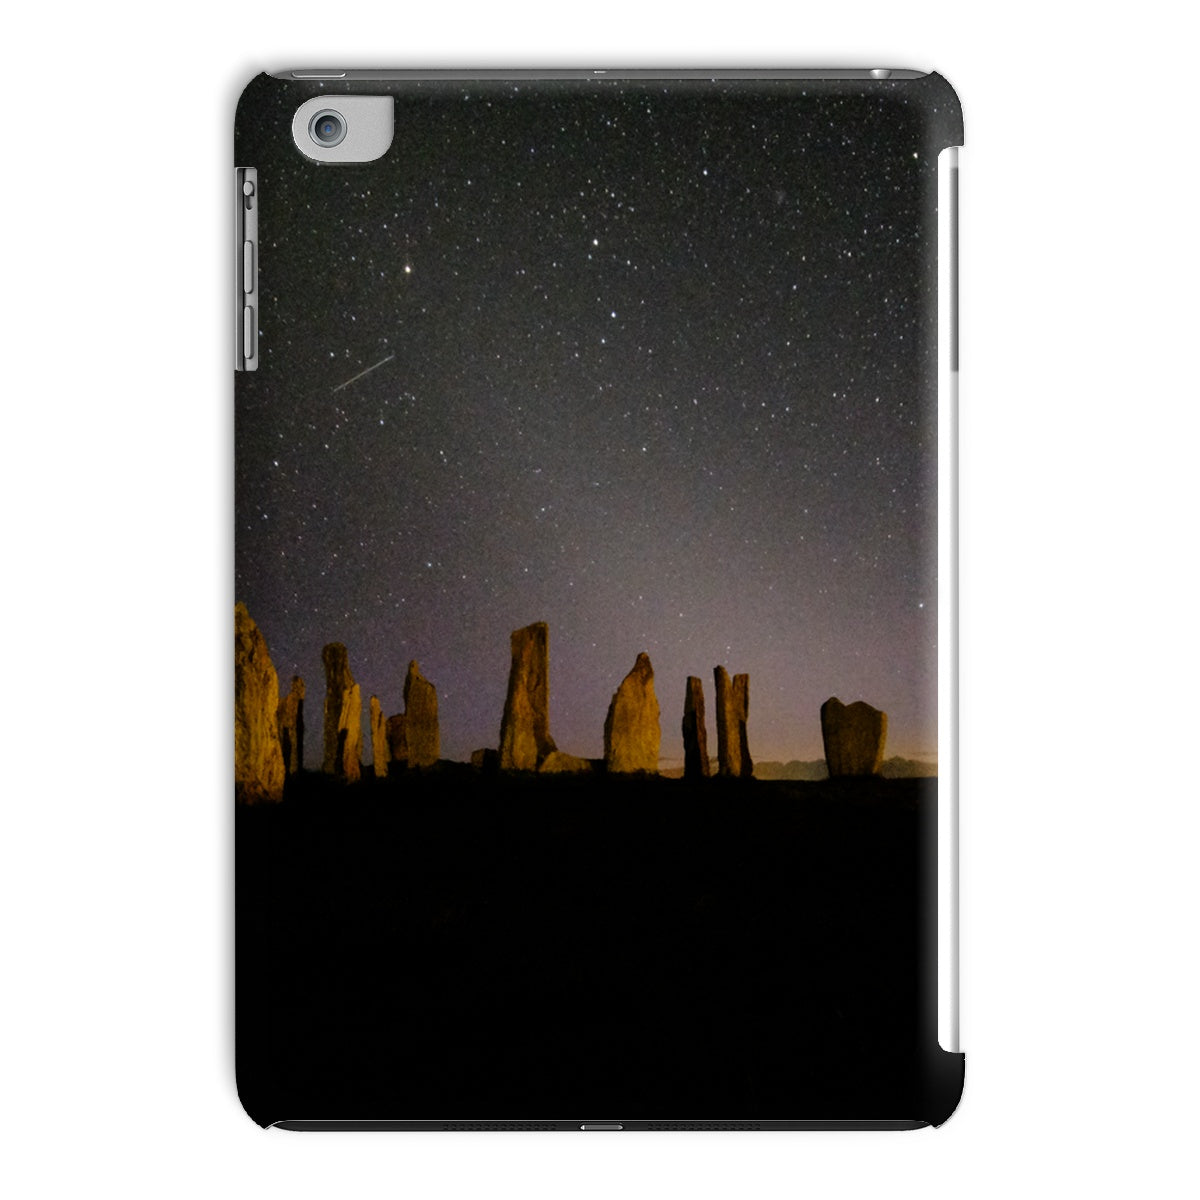 Callanish and Zodiacal light Tablet Cases